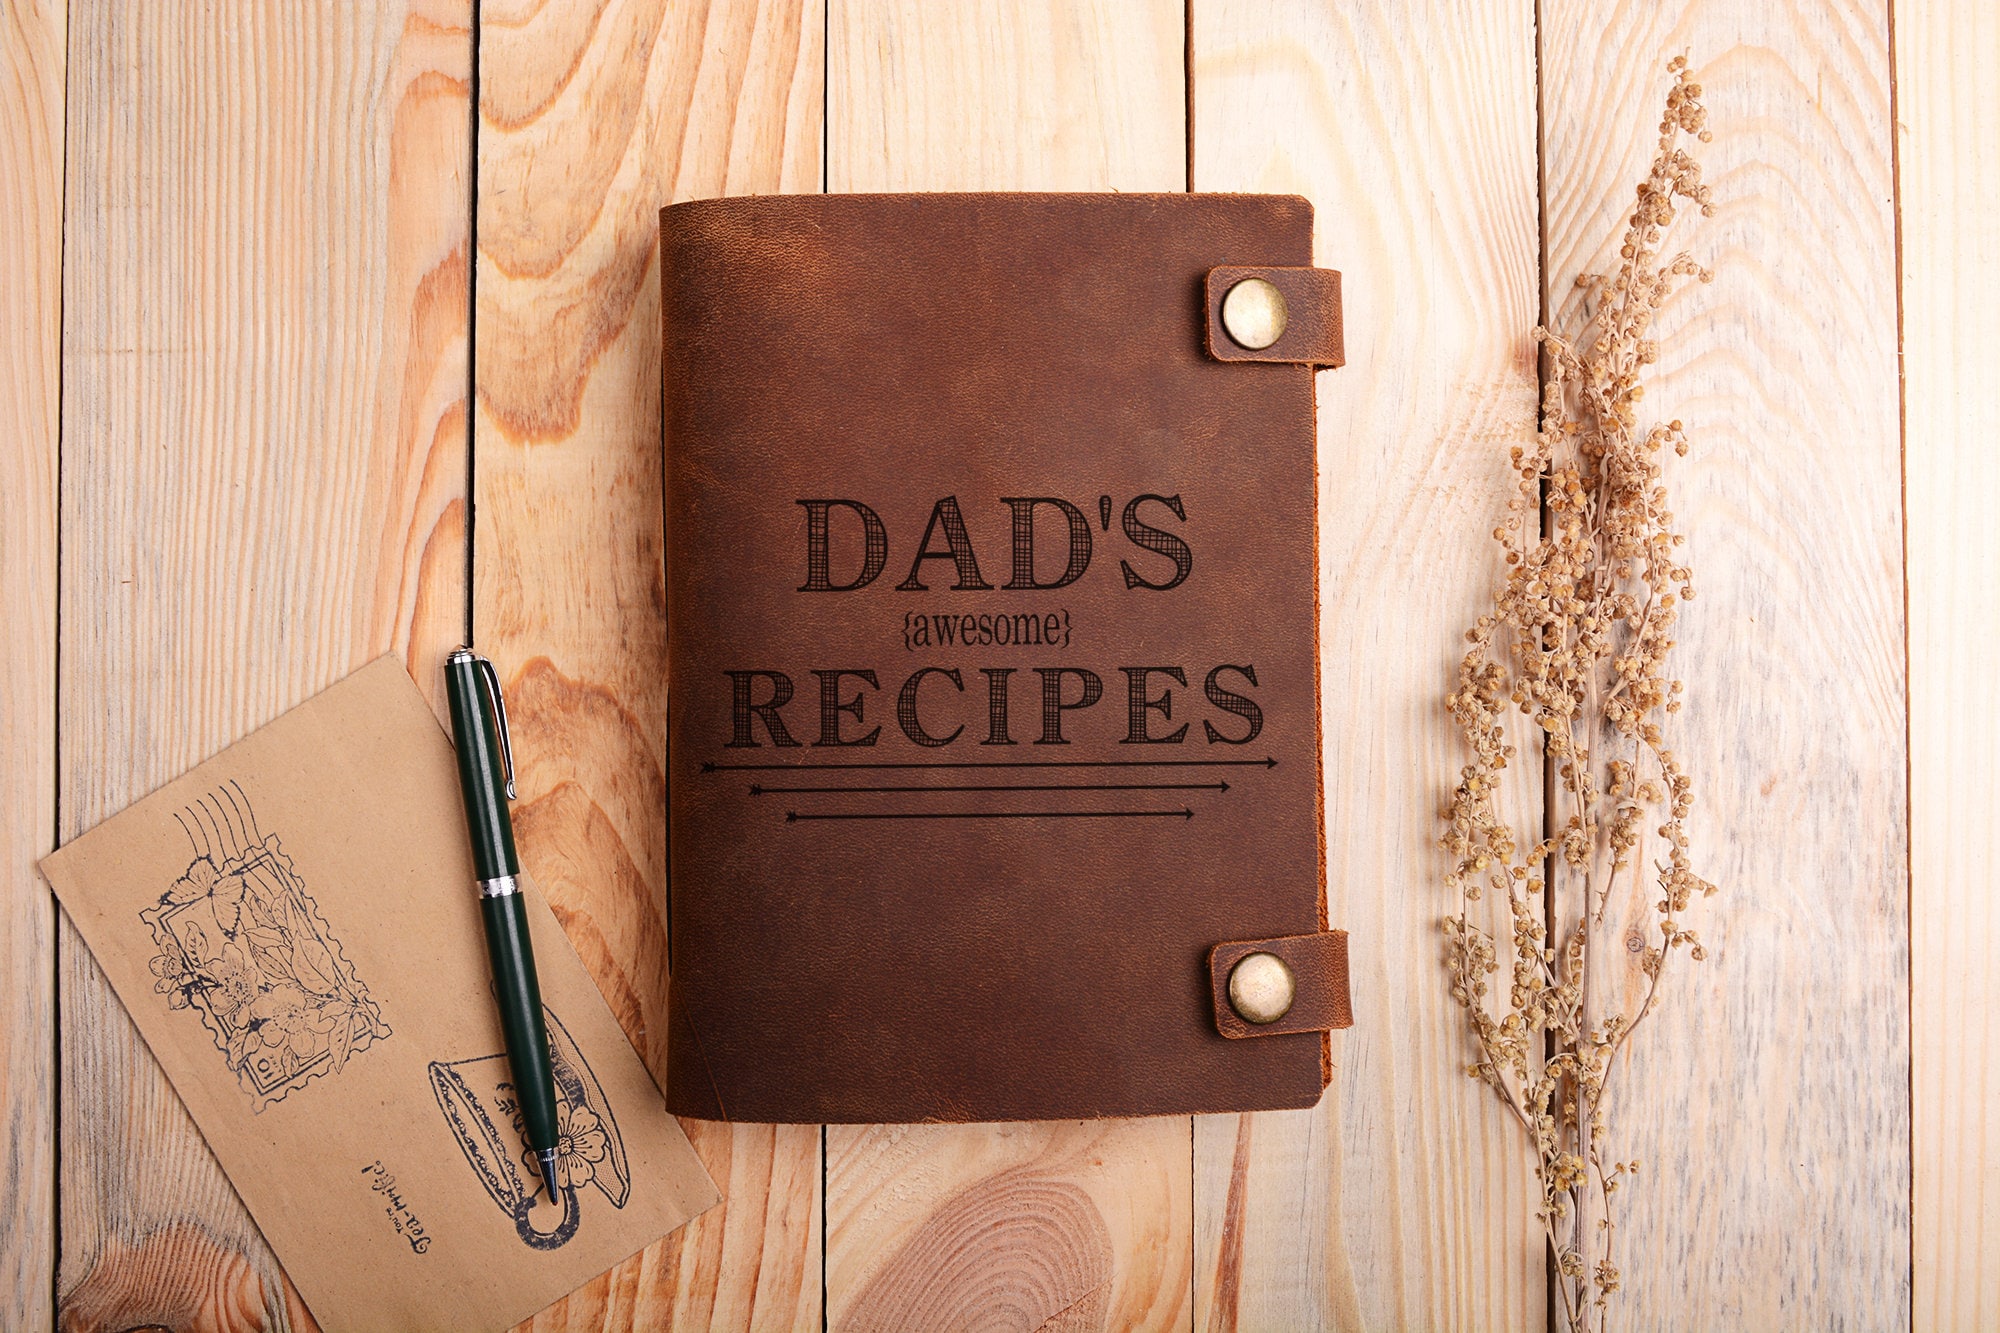 Dad's Badass Recipes: Blank Recipe Cookbook to Write In - Gift Idea For  Dads, Fathers or Men That Cook - Empty Recipe Book - Make Your Own C  (Paperback)